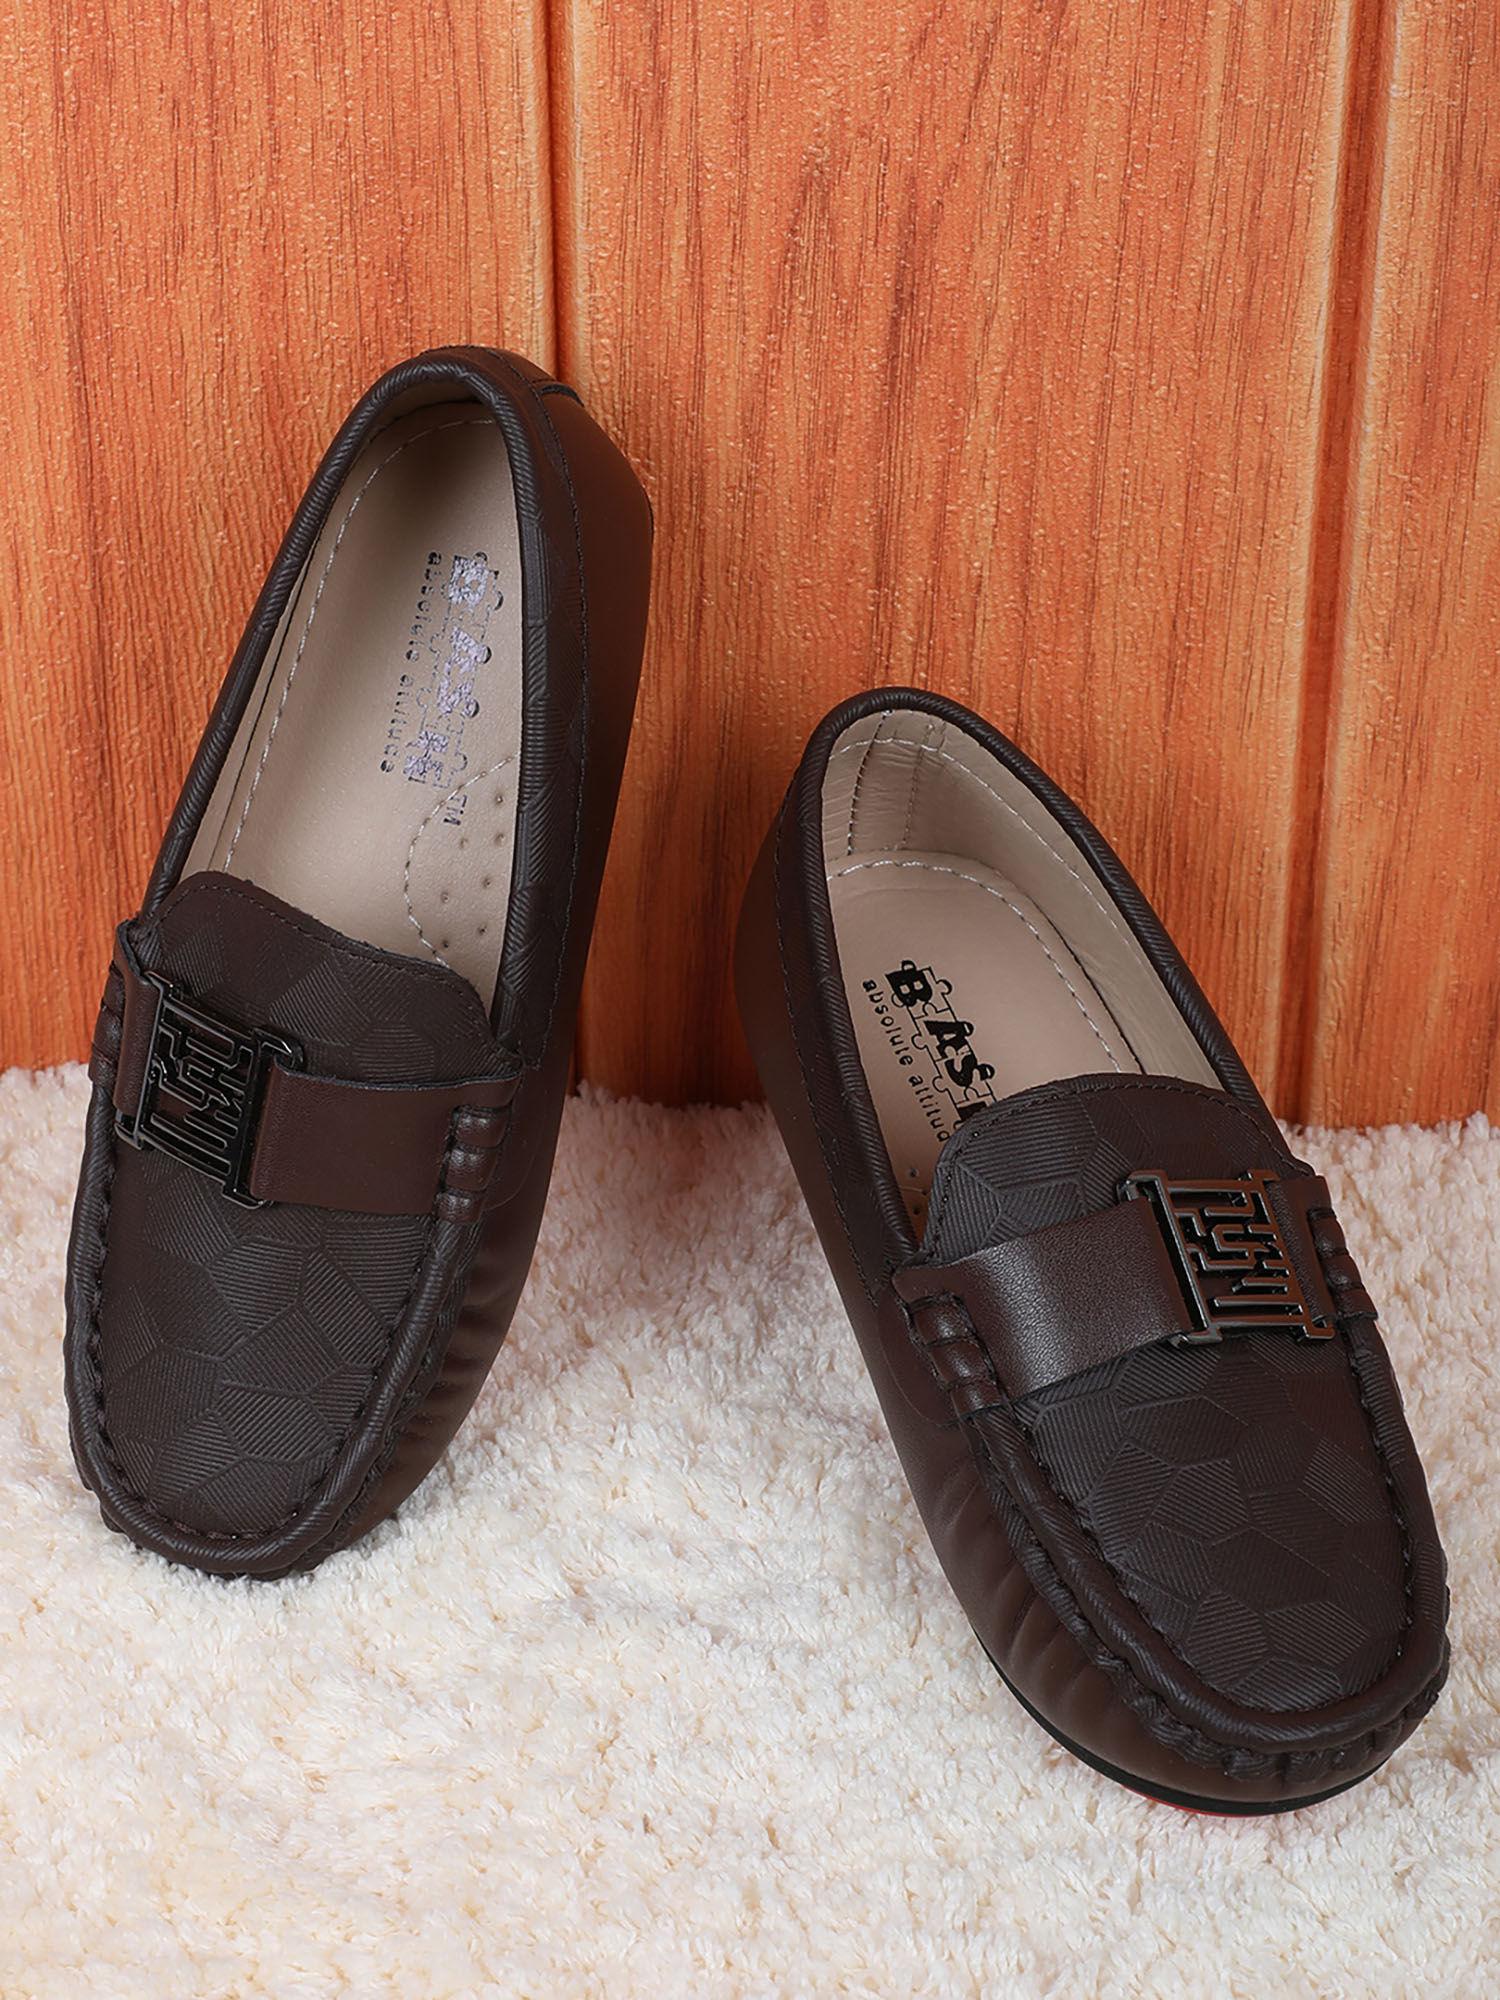 bash kids textured leatherite loafer shoes brown